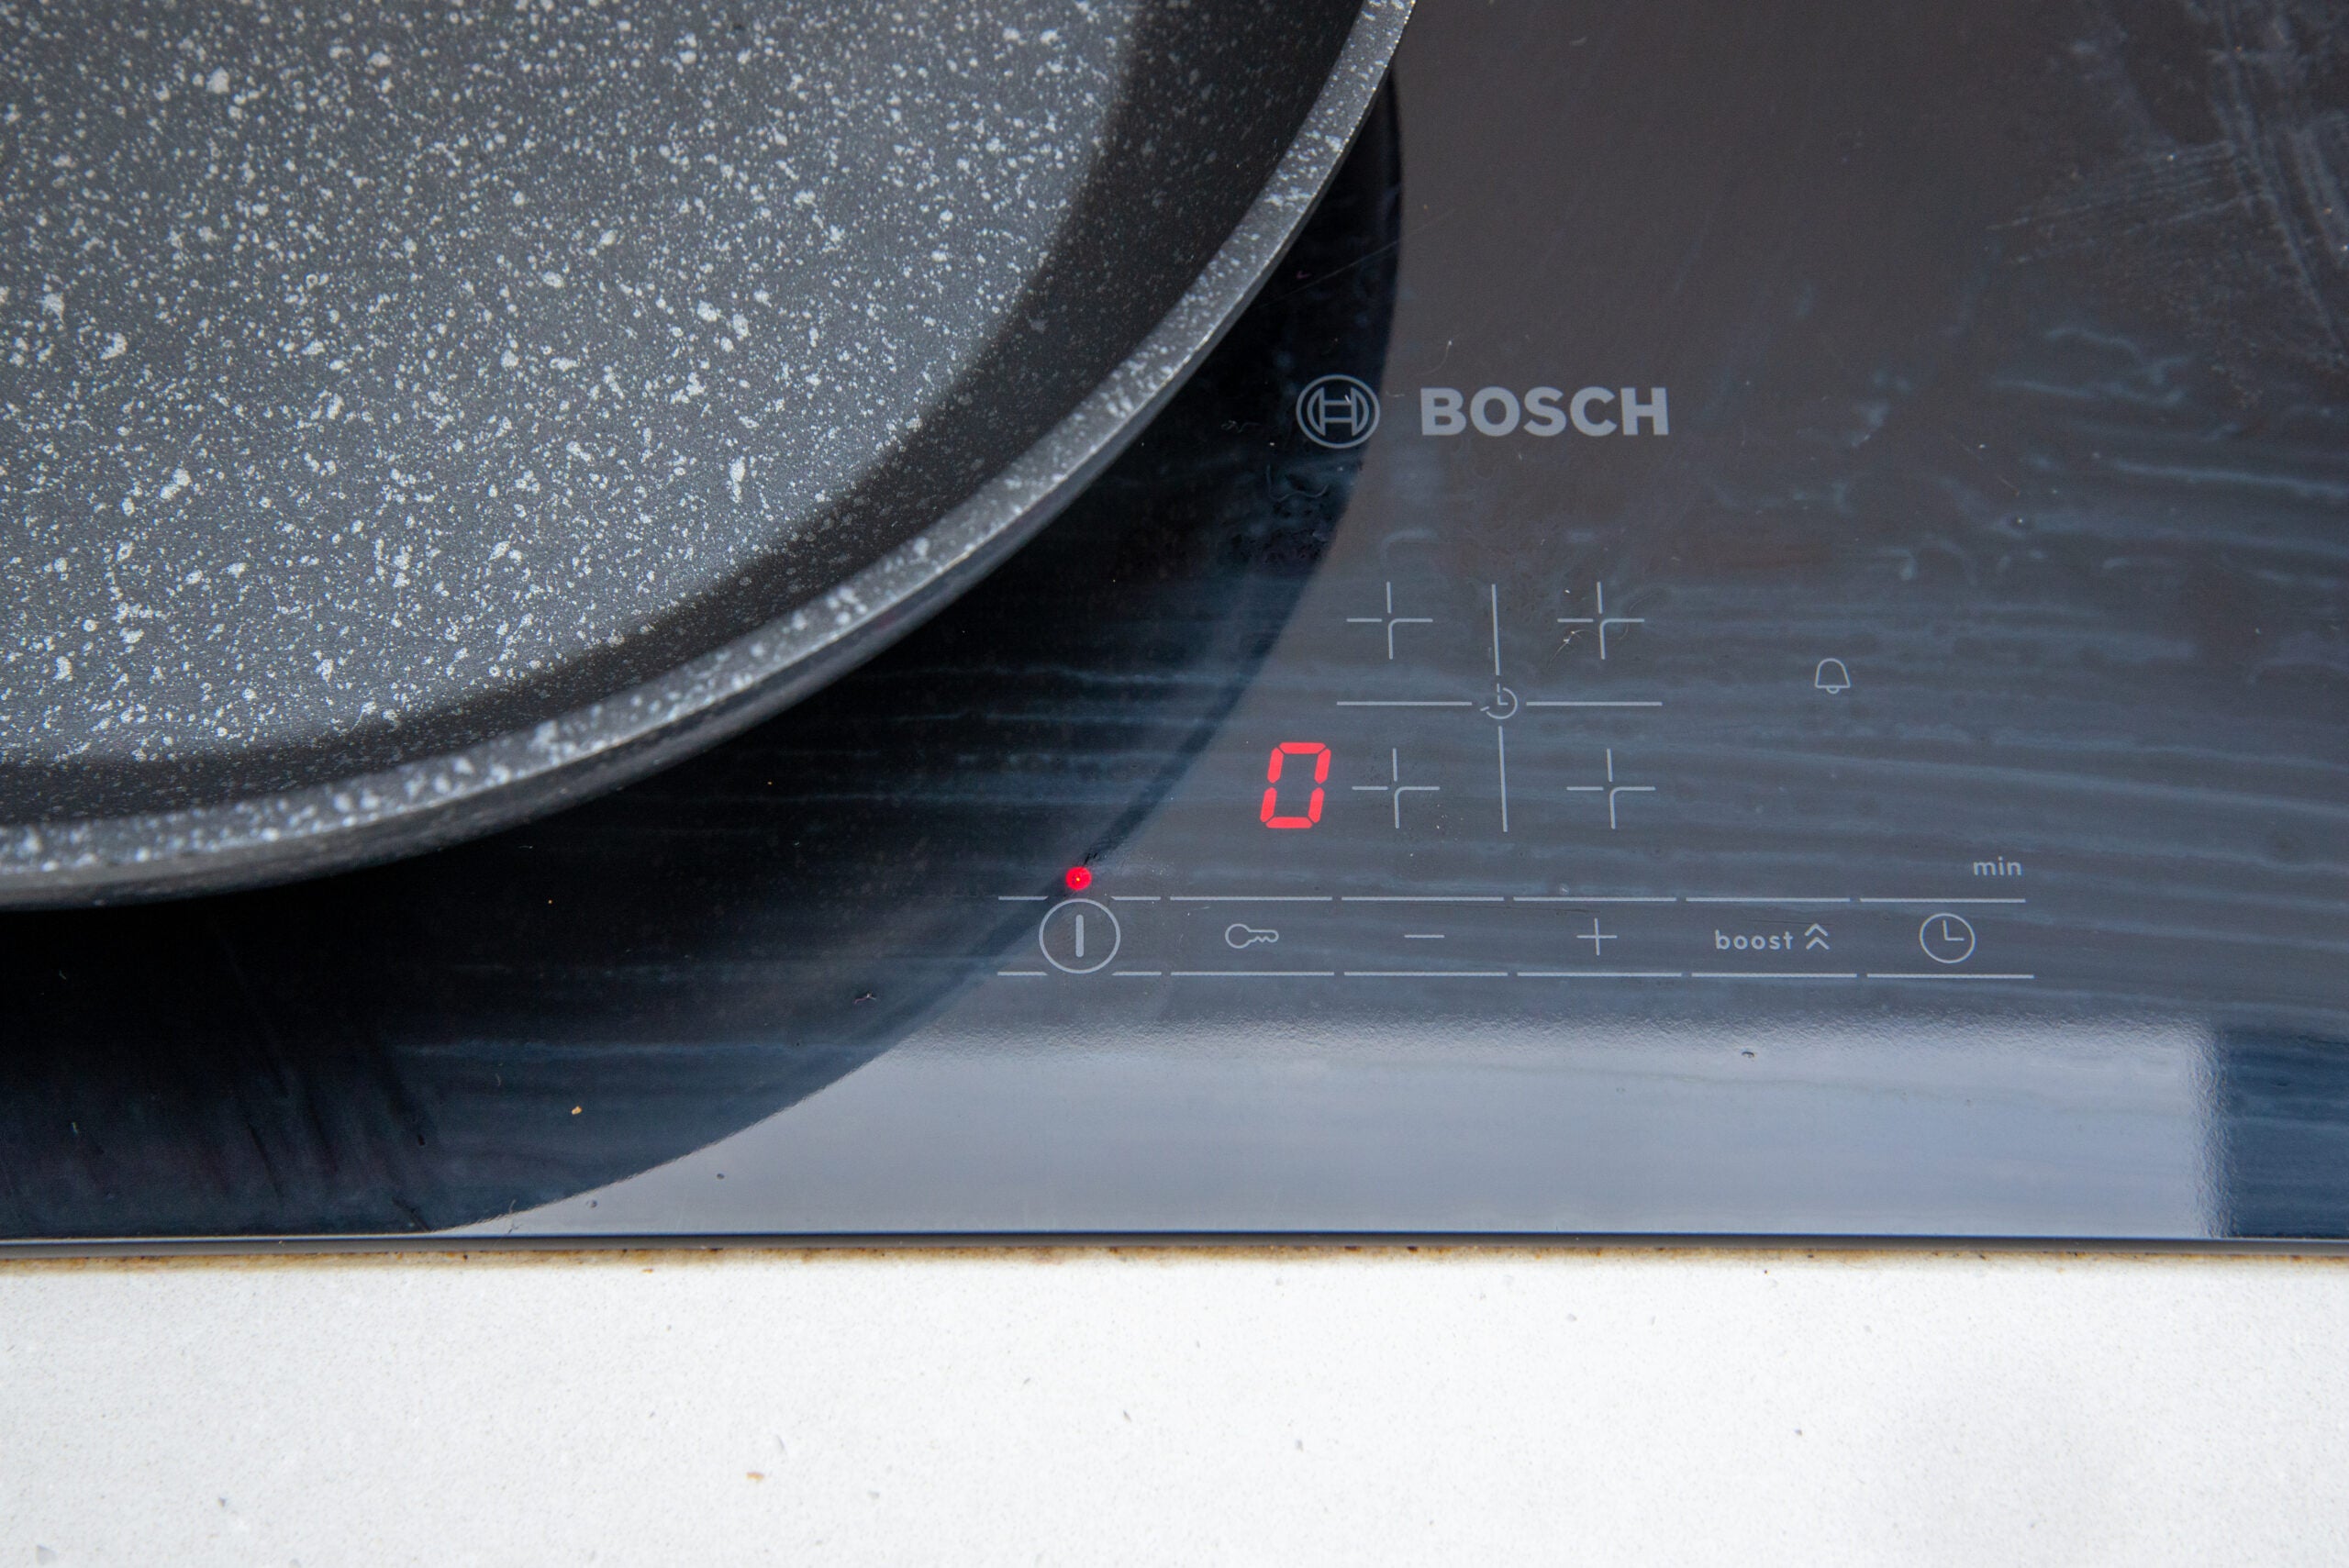 Turn on an induction hob